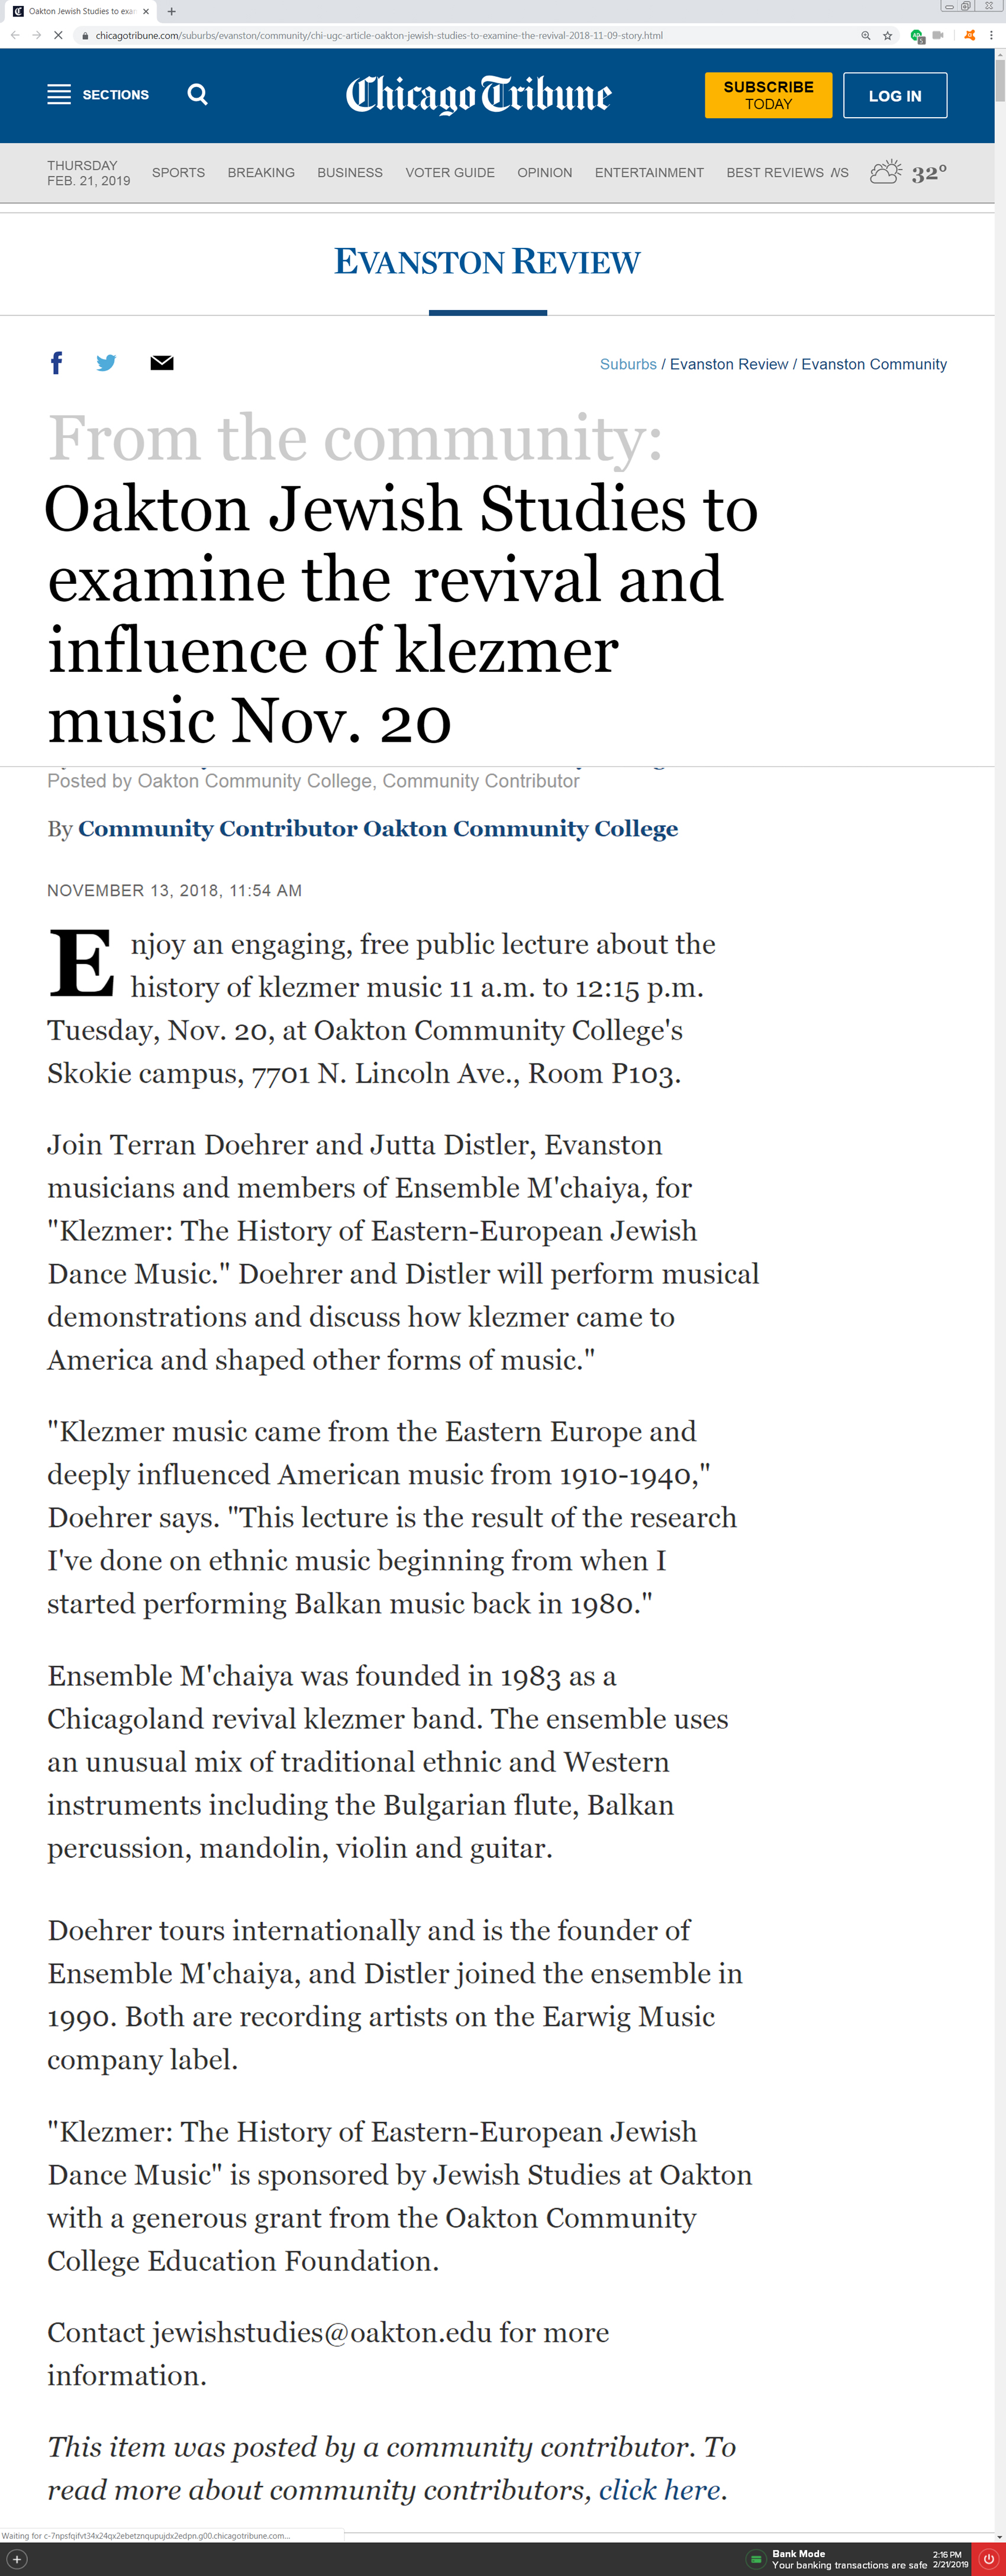 Article in the Chicago Tribune — Evanston Review From The Community’s announcing the Ensemble M’chaiya (tm)’s lecture about Klezmer at Oakton Community College.